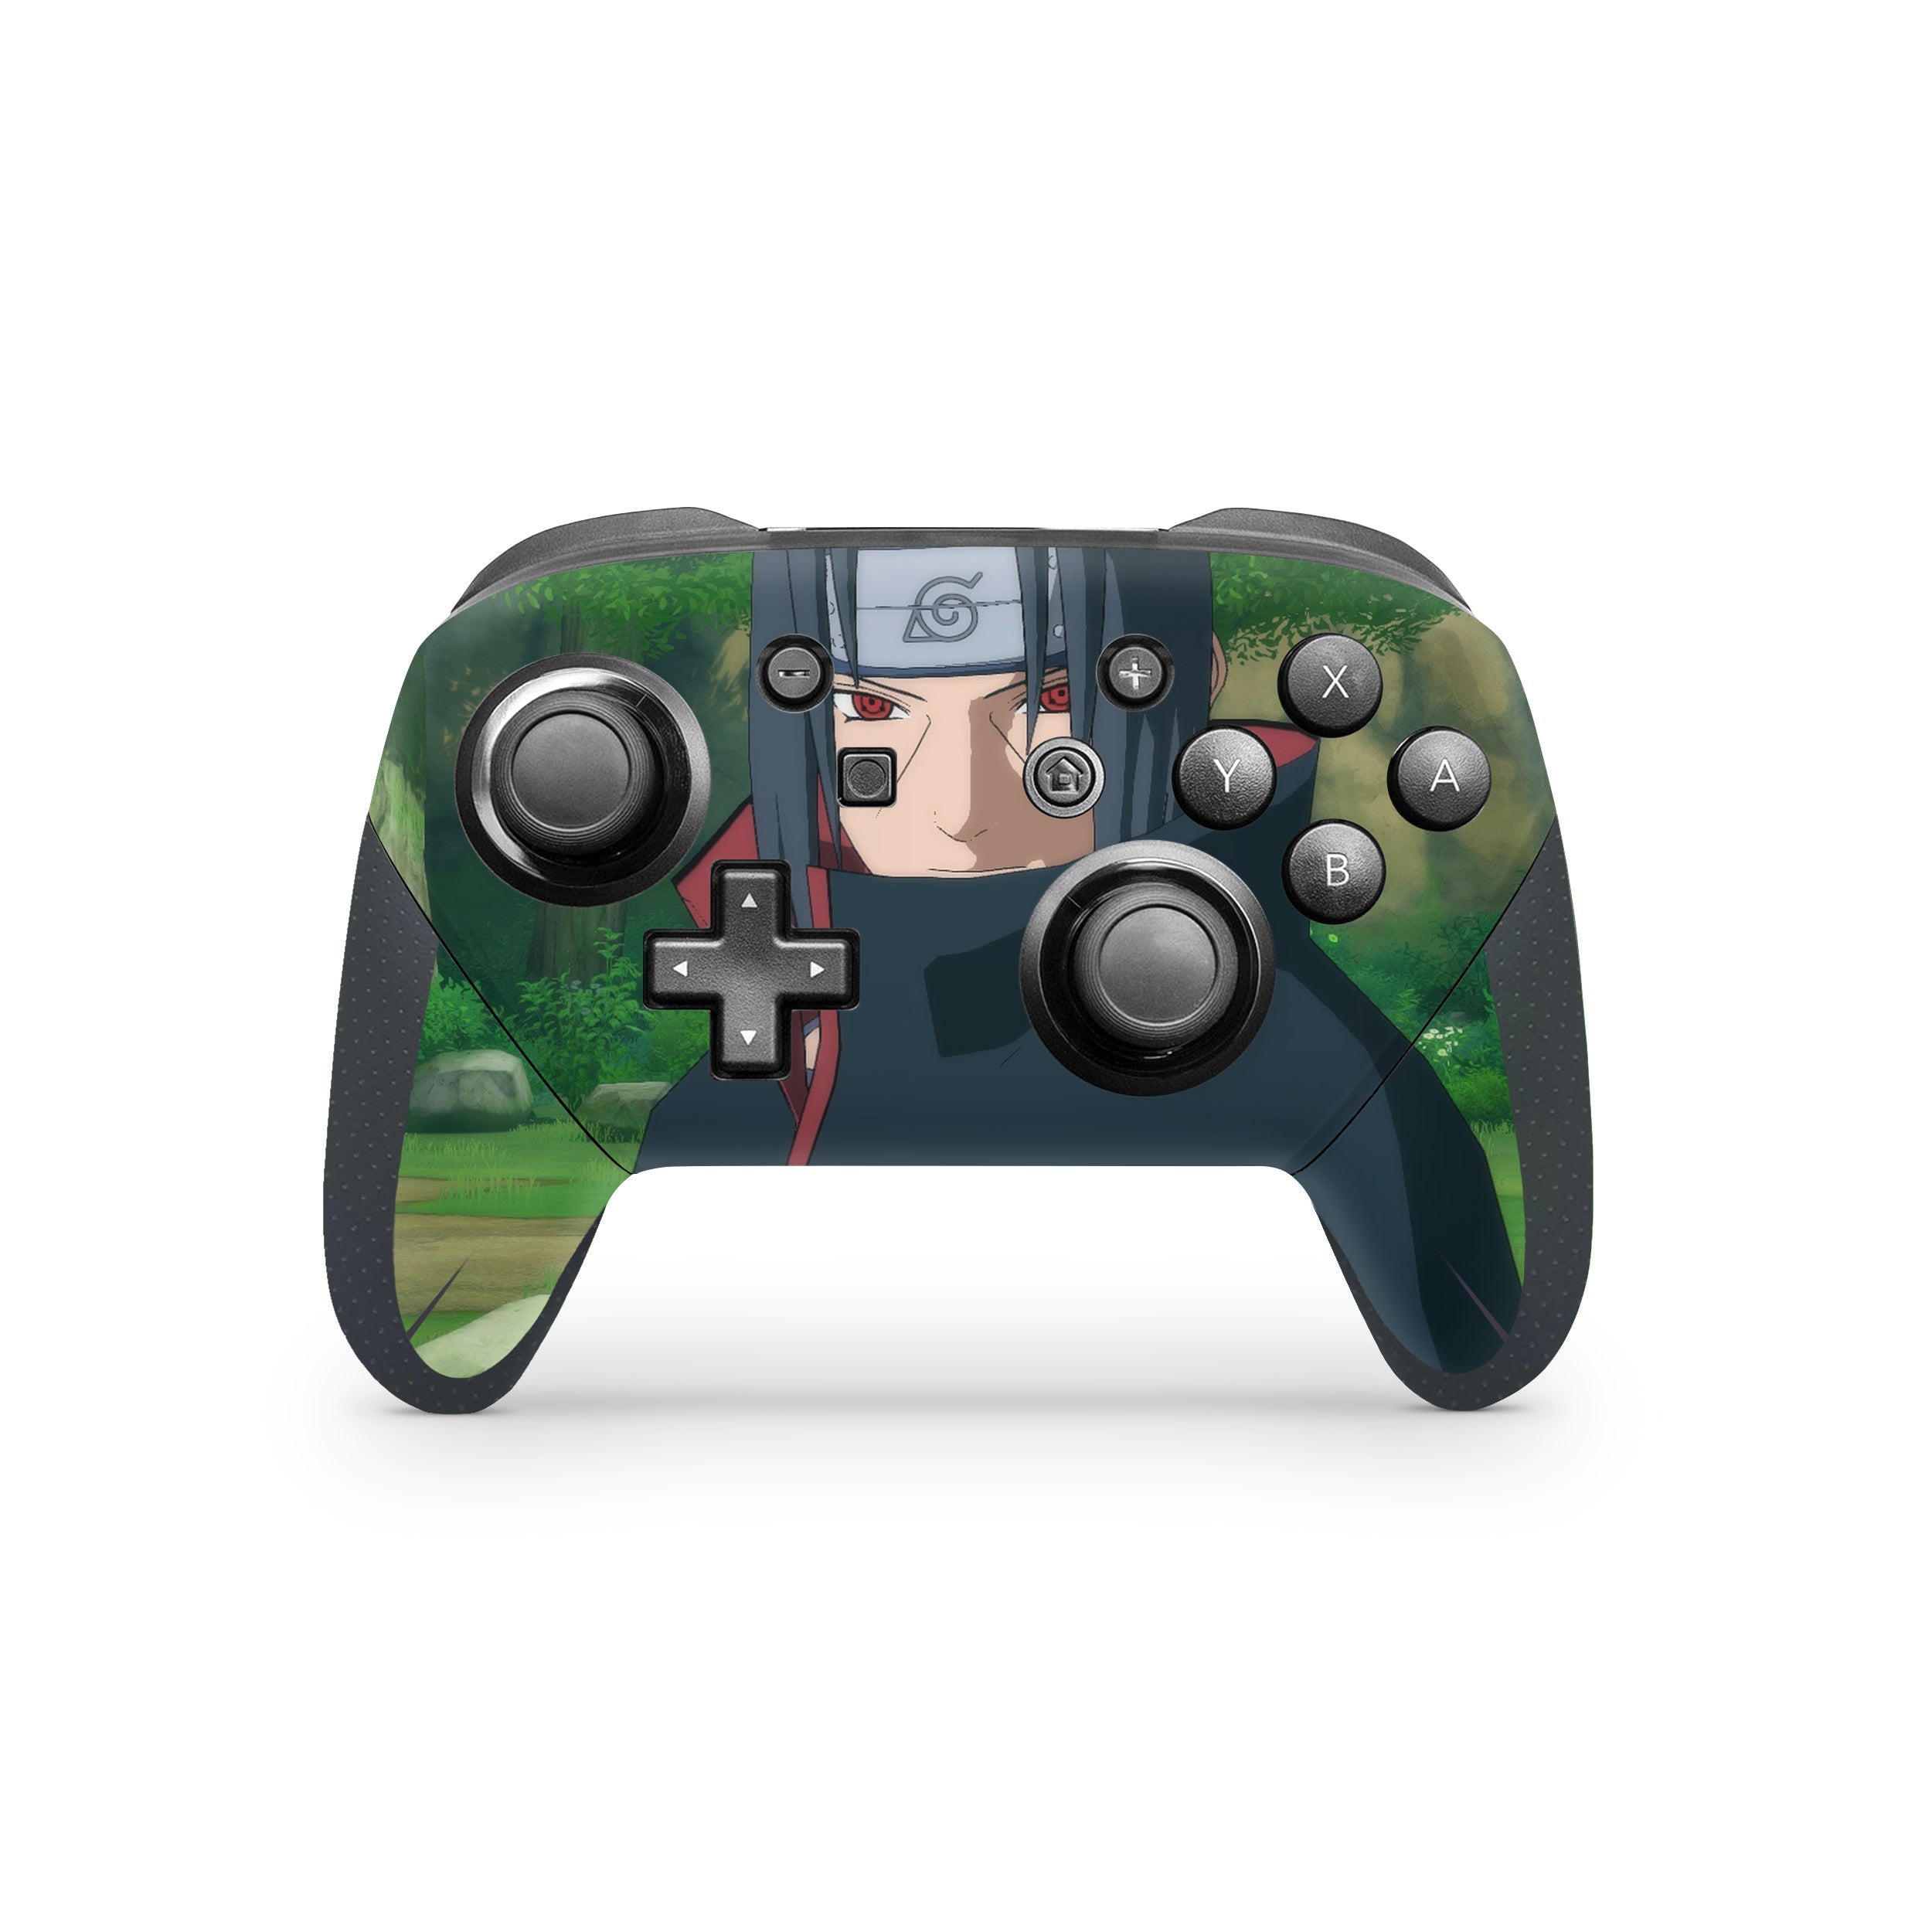 A video game skin featuring a Naruto Itachi design for the Switch Pro Controller.